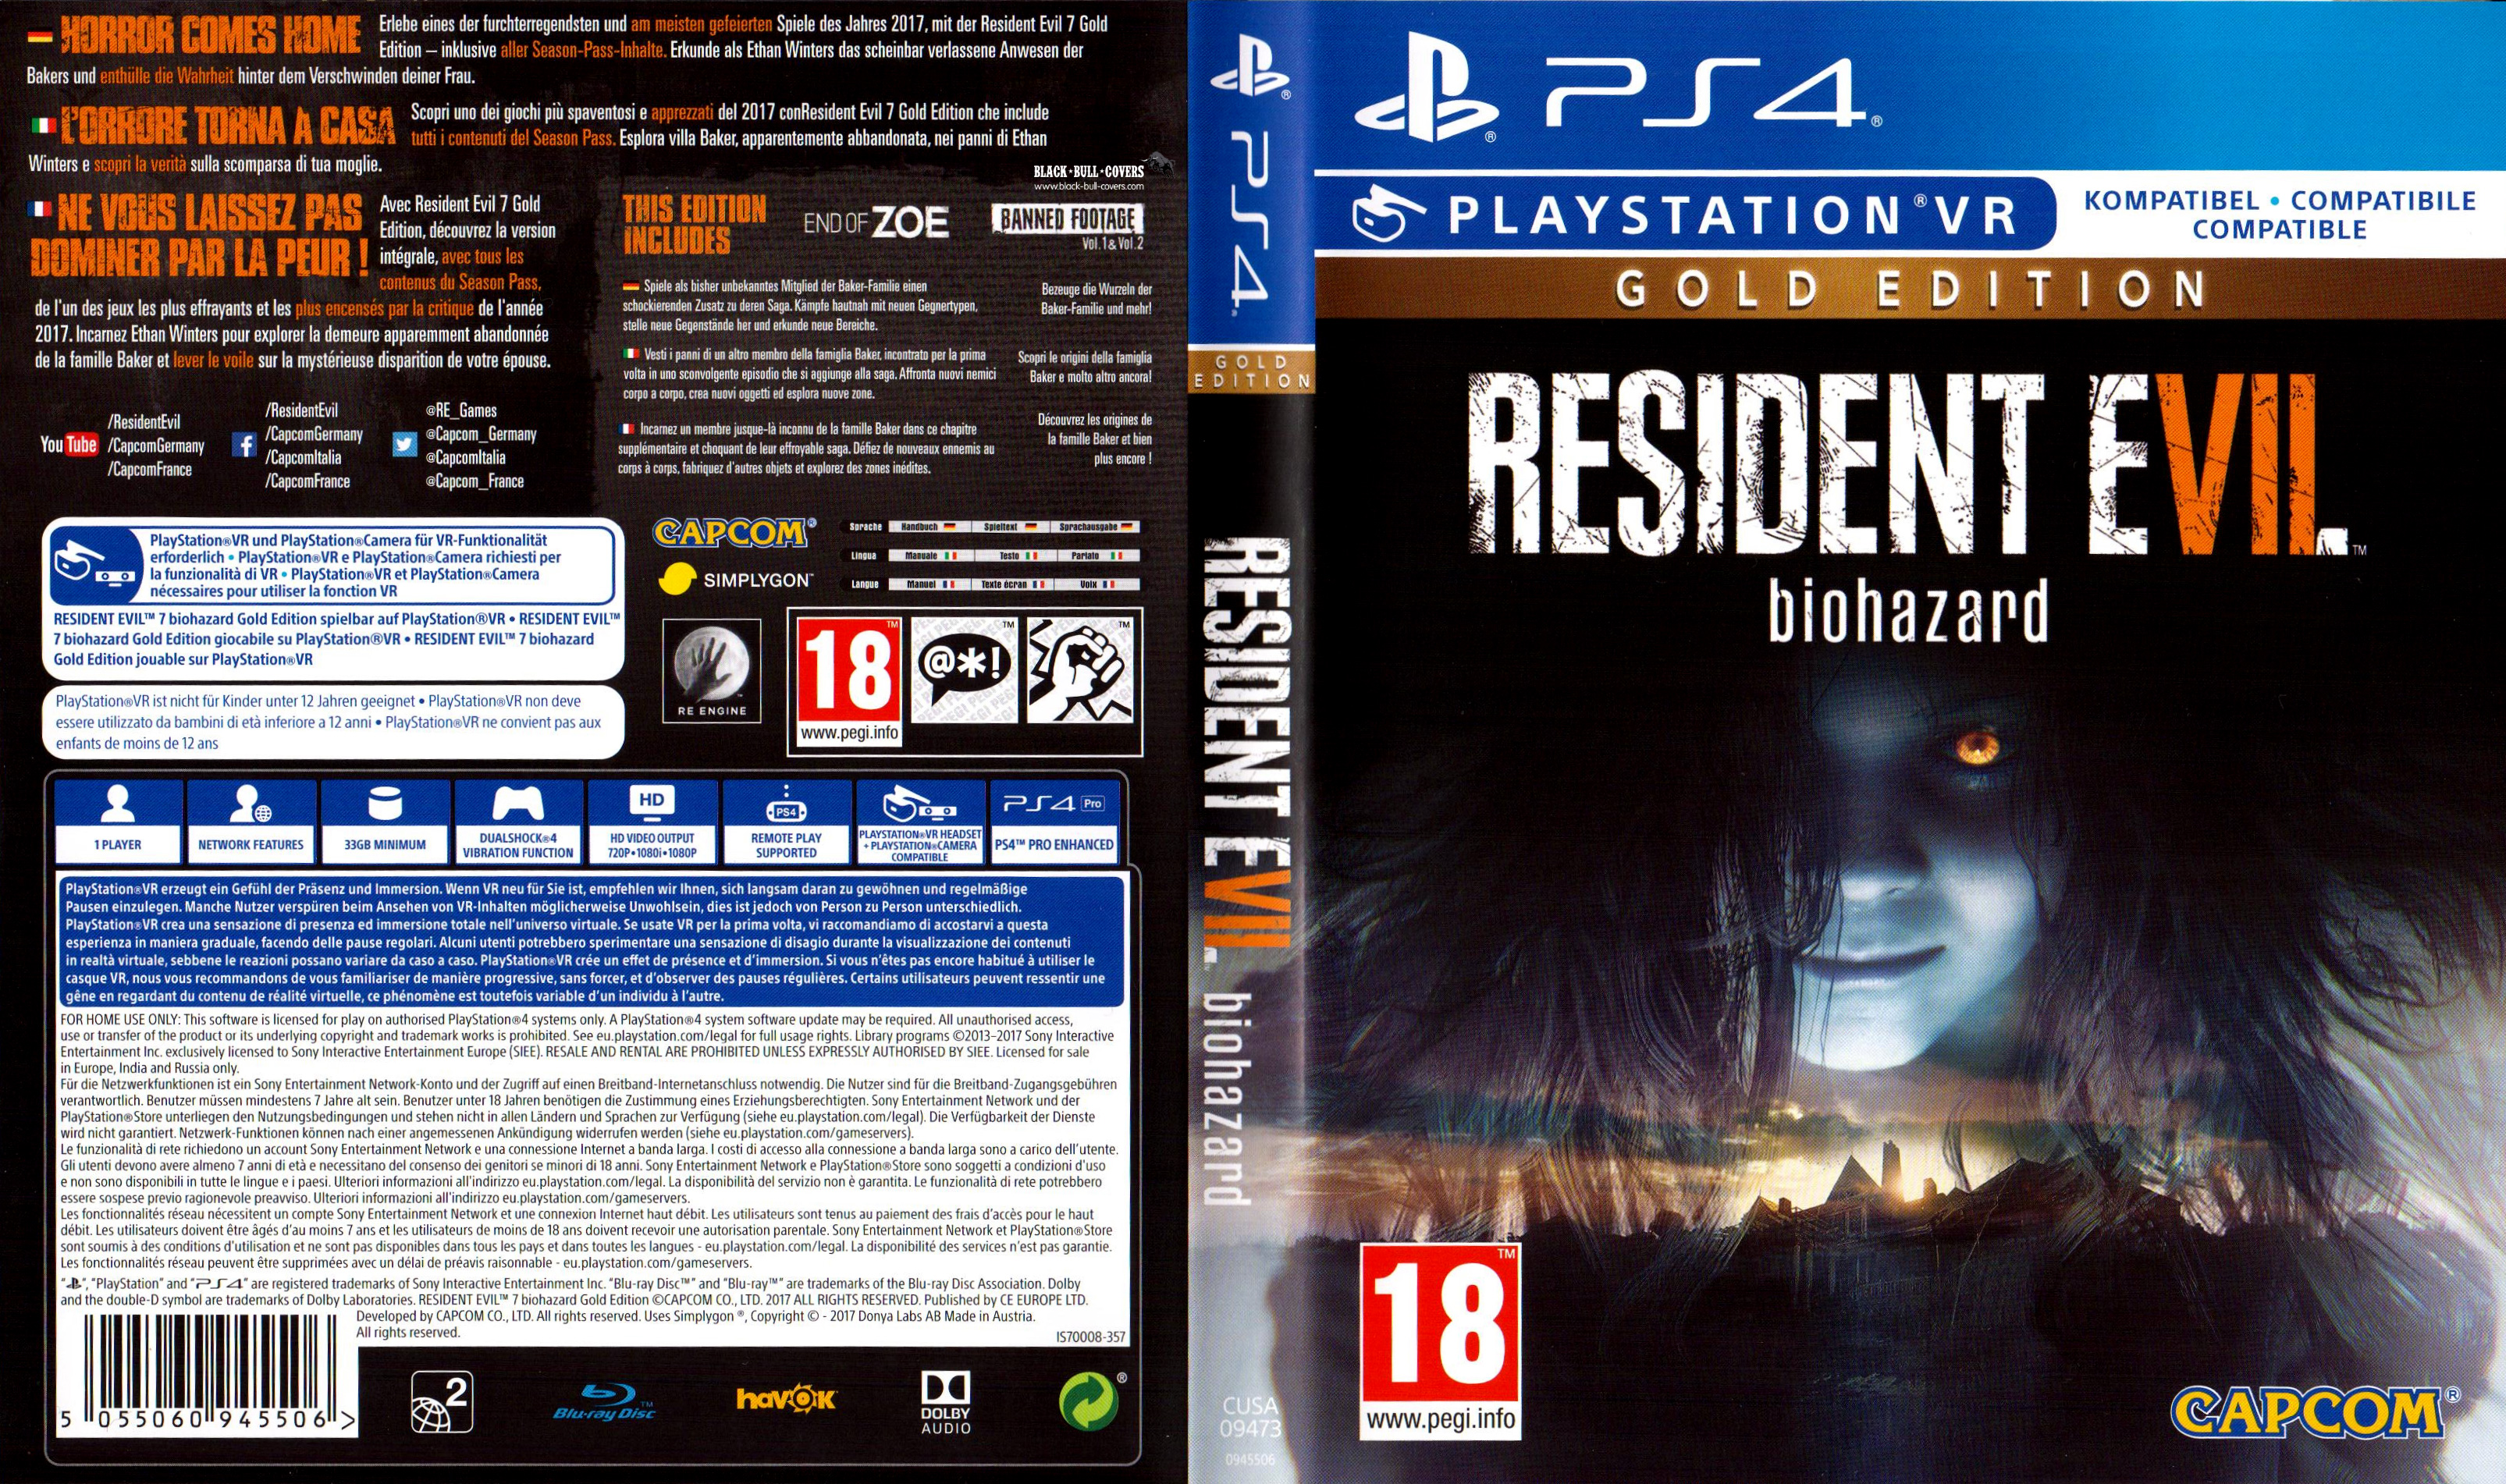 Resident Evil 7 Gold Edition Biohazard Cover german cover | German DVD Covers